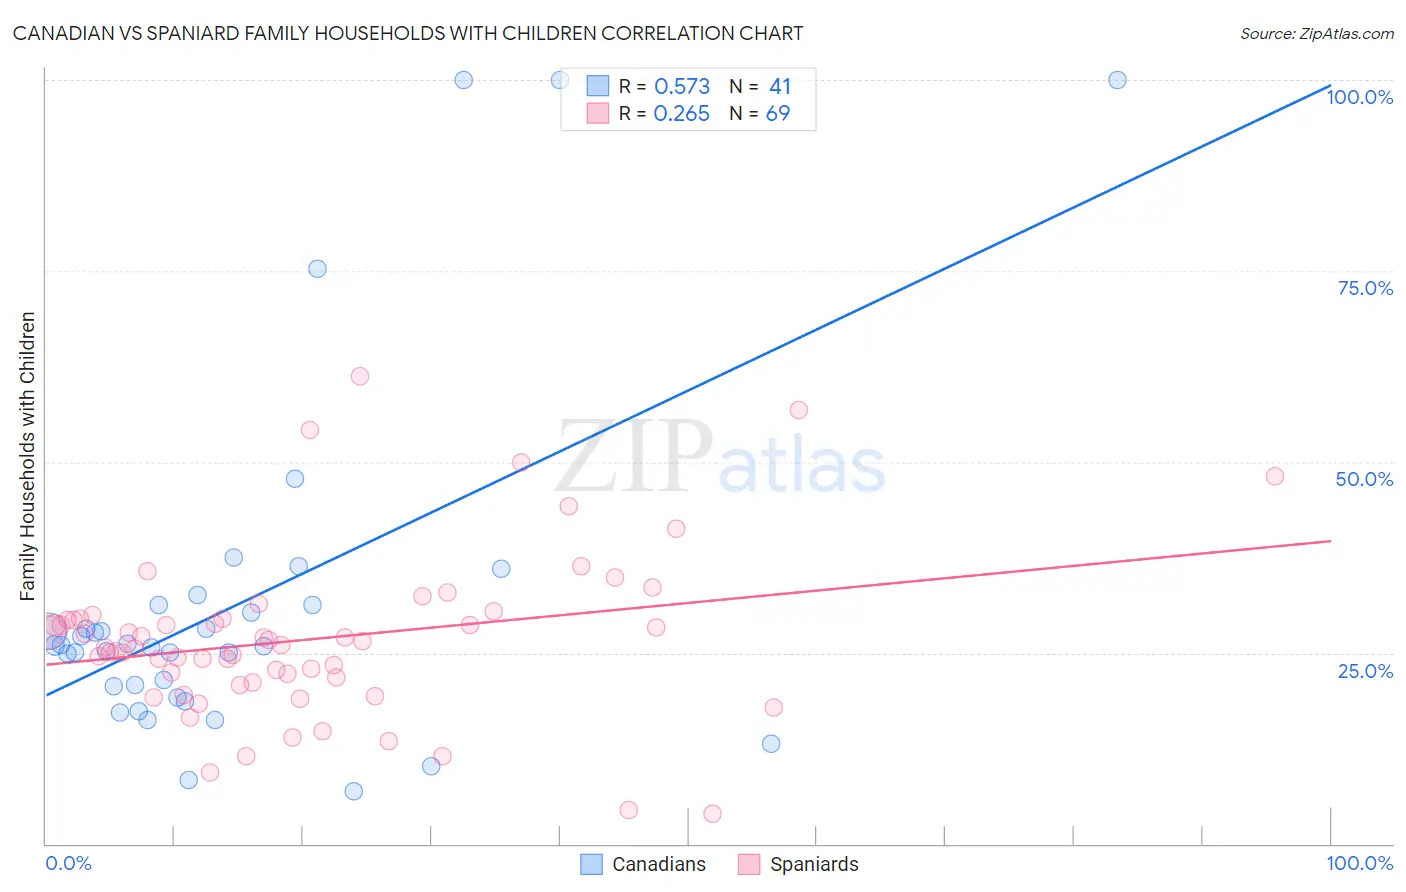 Canadian vs Spaniard Family Households with Children